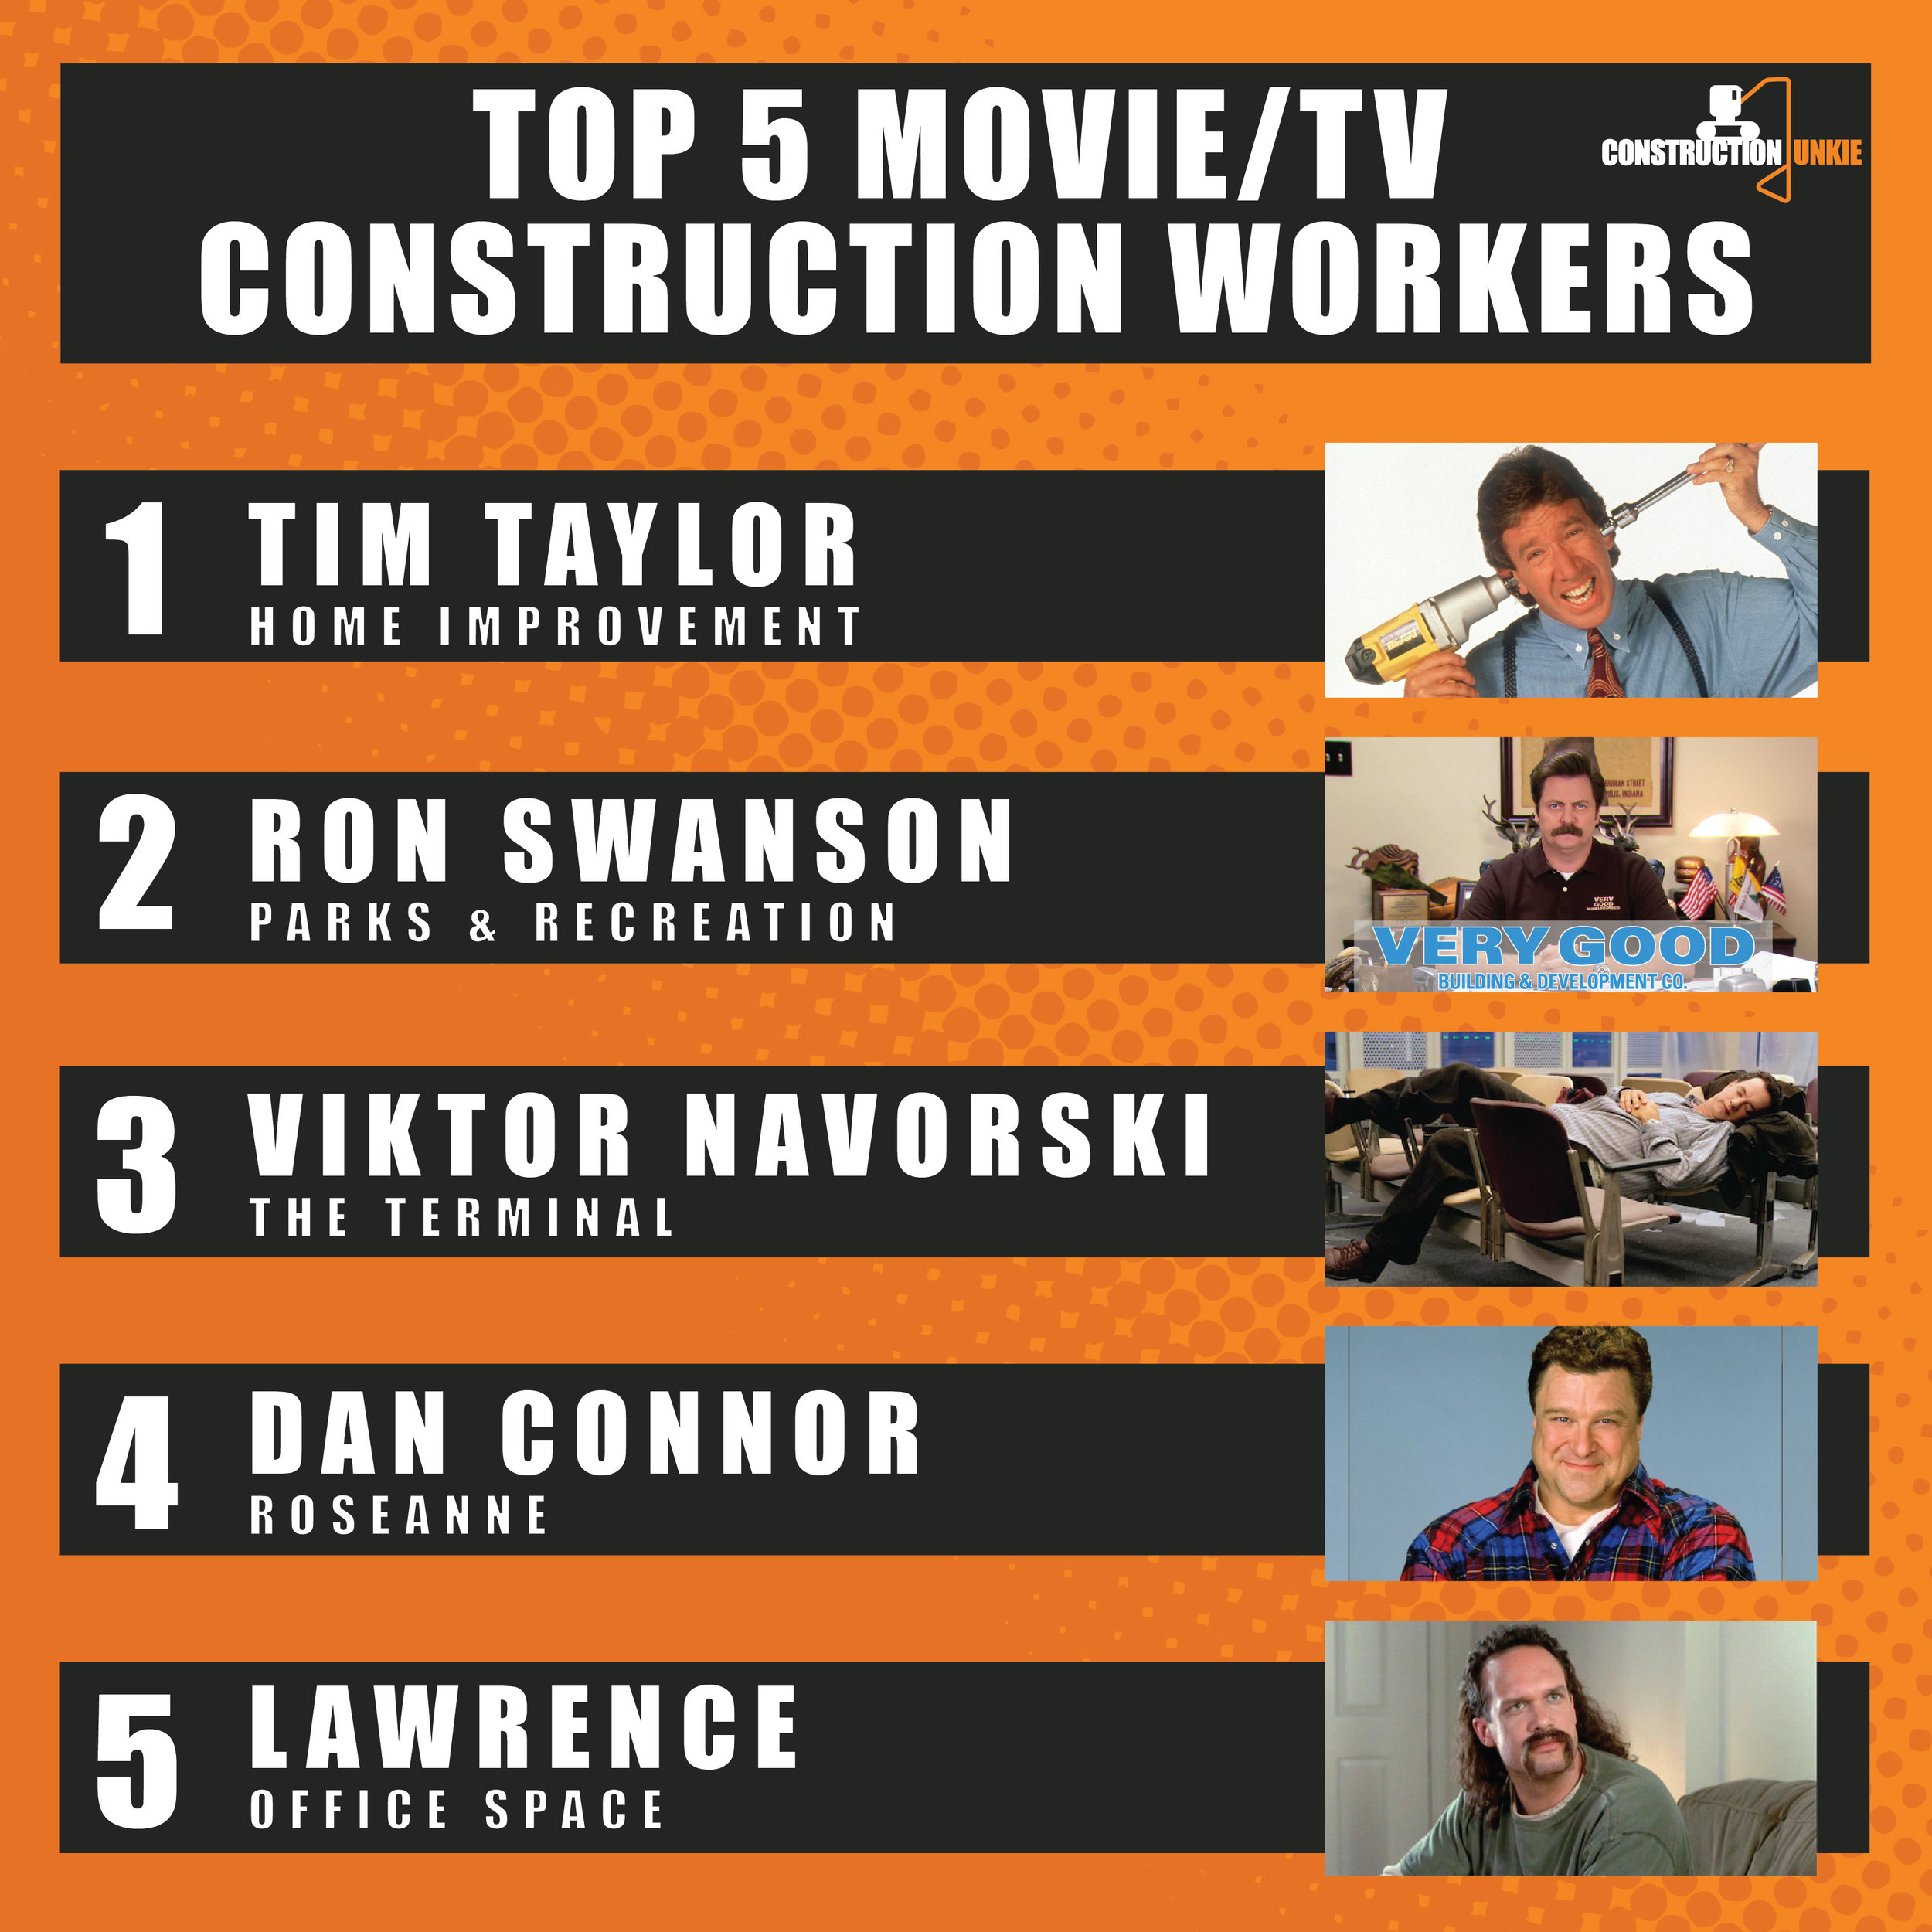 1. Tim “the Tool Man” Taylor (Home Improvement) 2. Ron Swanson (Parks &amp; Recreation) 3. Viktor Navorski (The Terminal) 4. Dan Connor (Roseanne) 5. Lawrence (Office Space)